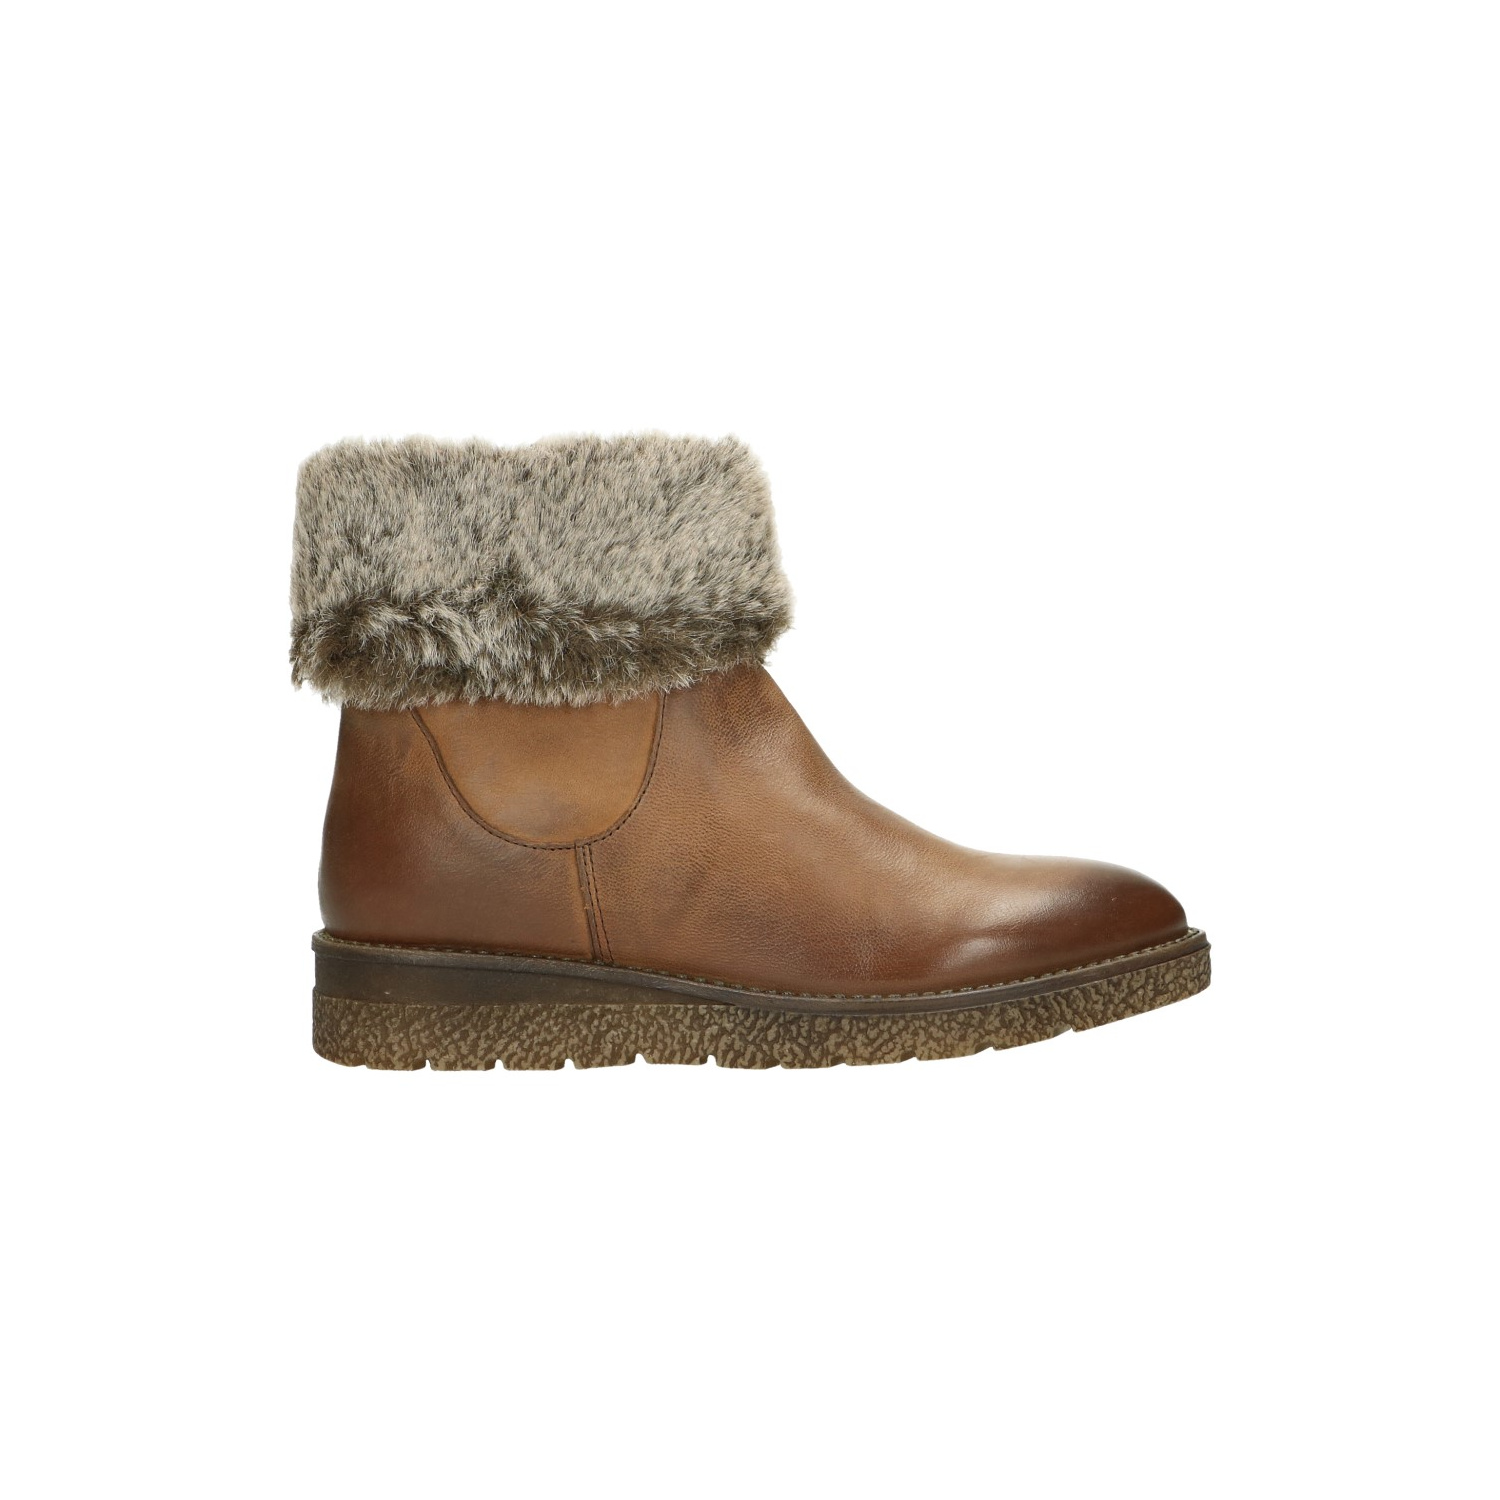 Klondike Boots / ancleboot cognac - Boots ancleboots Shoes - Ladies - Berca shoes